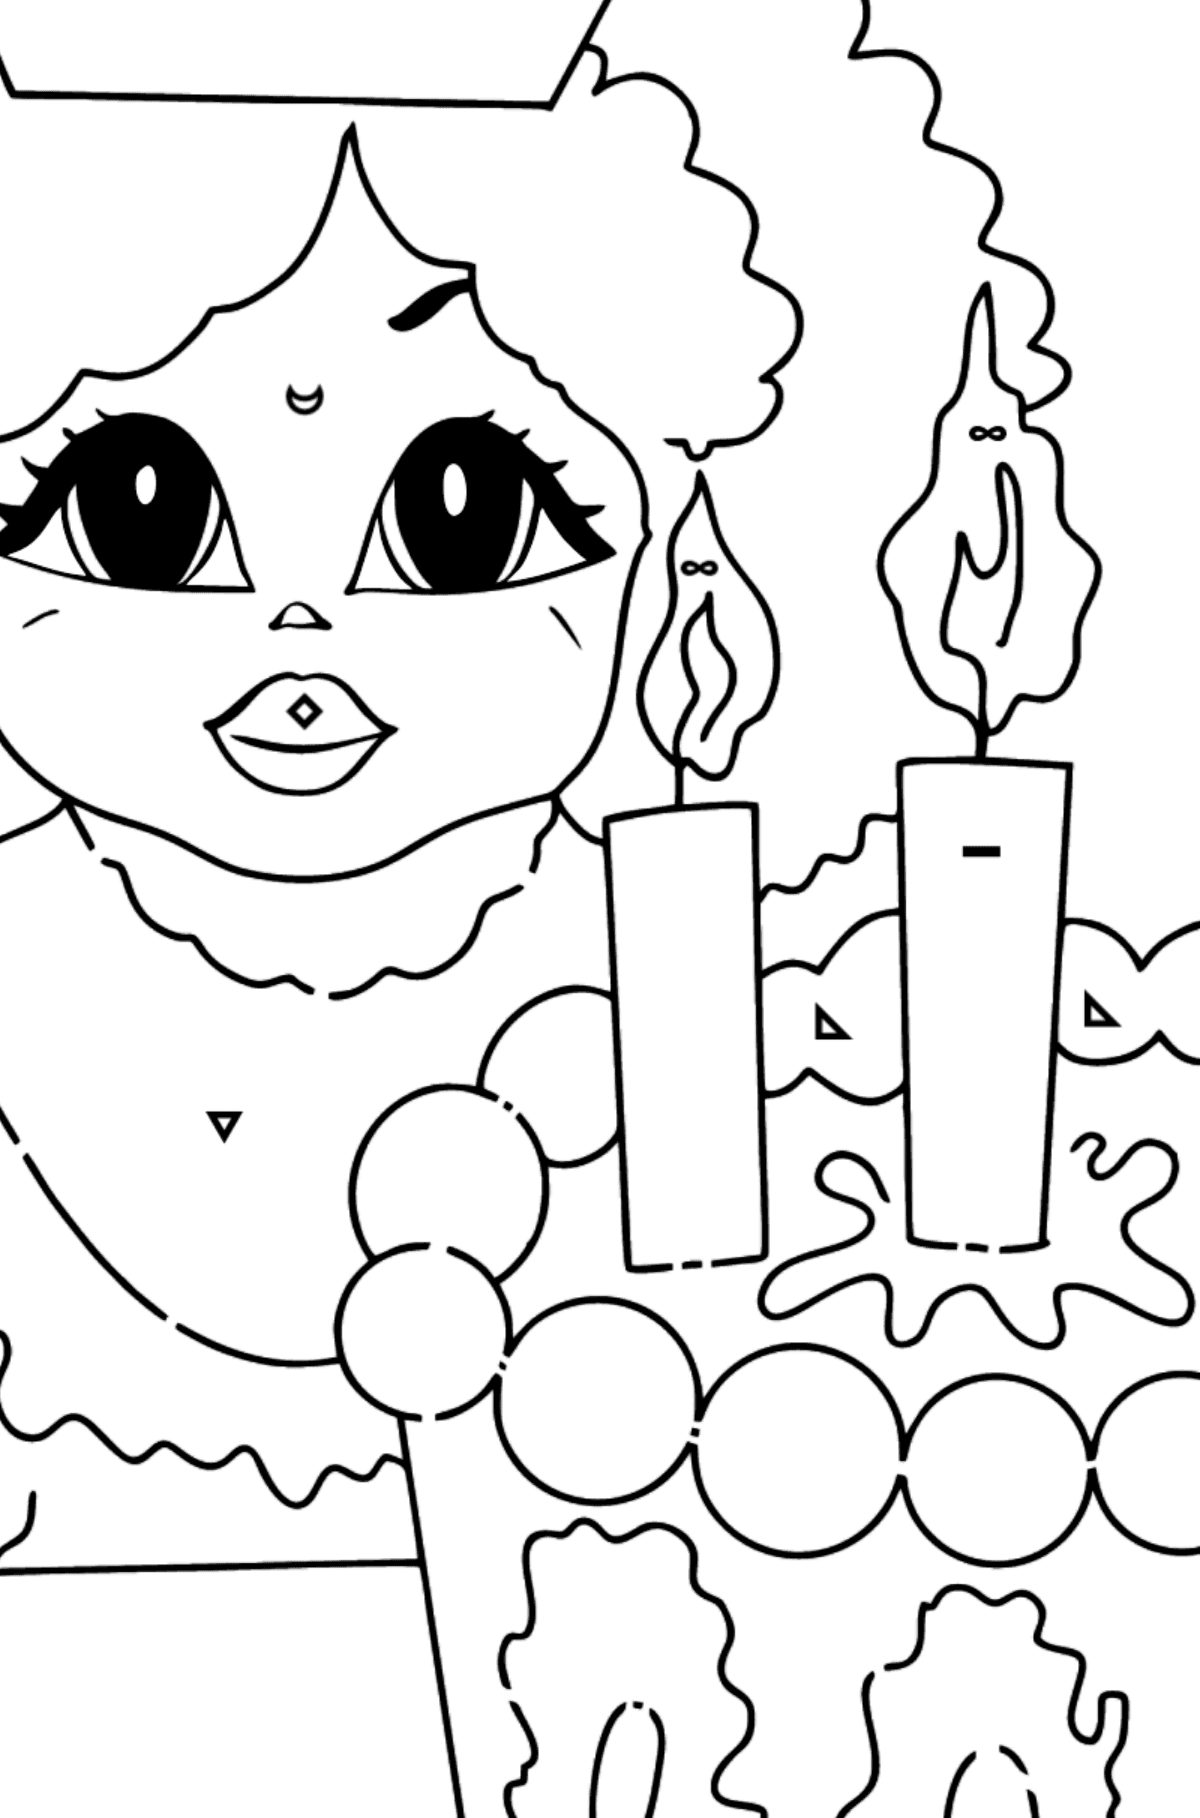 Coloring Page - A Princess with Cake - For Girls - Coloring by Symbols and Geometric Shapes for Kids